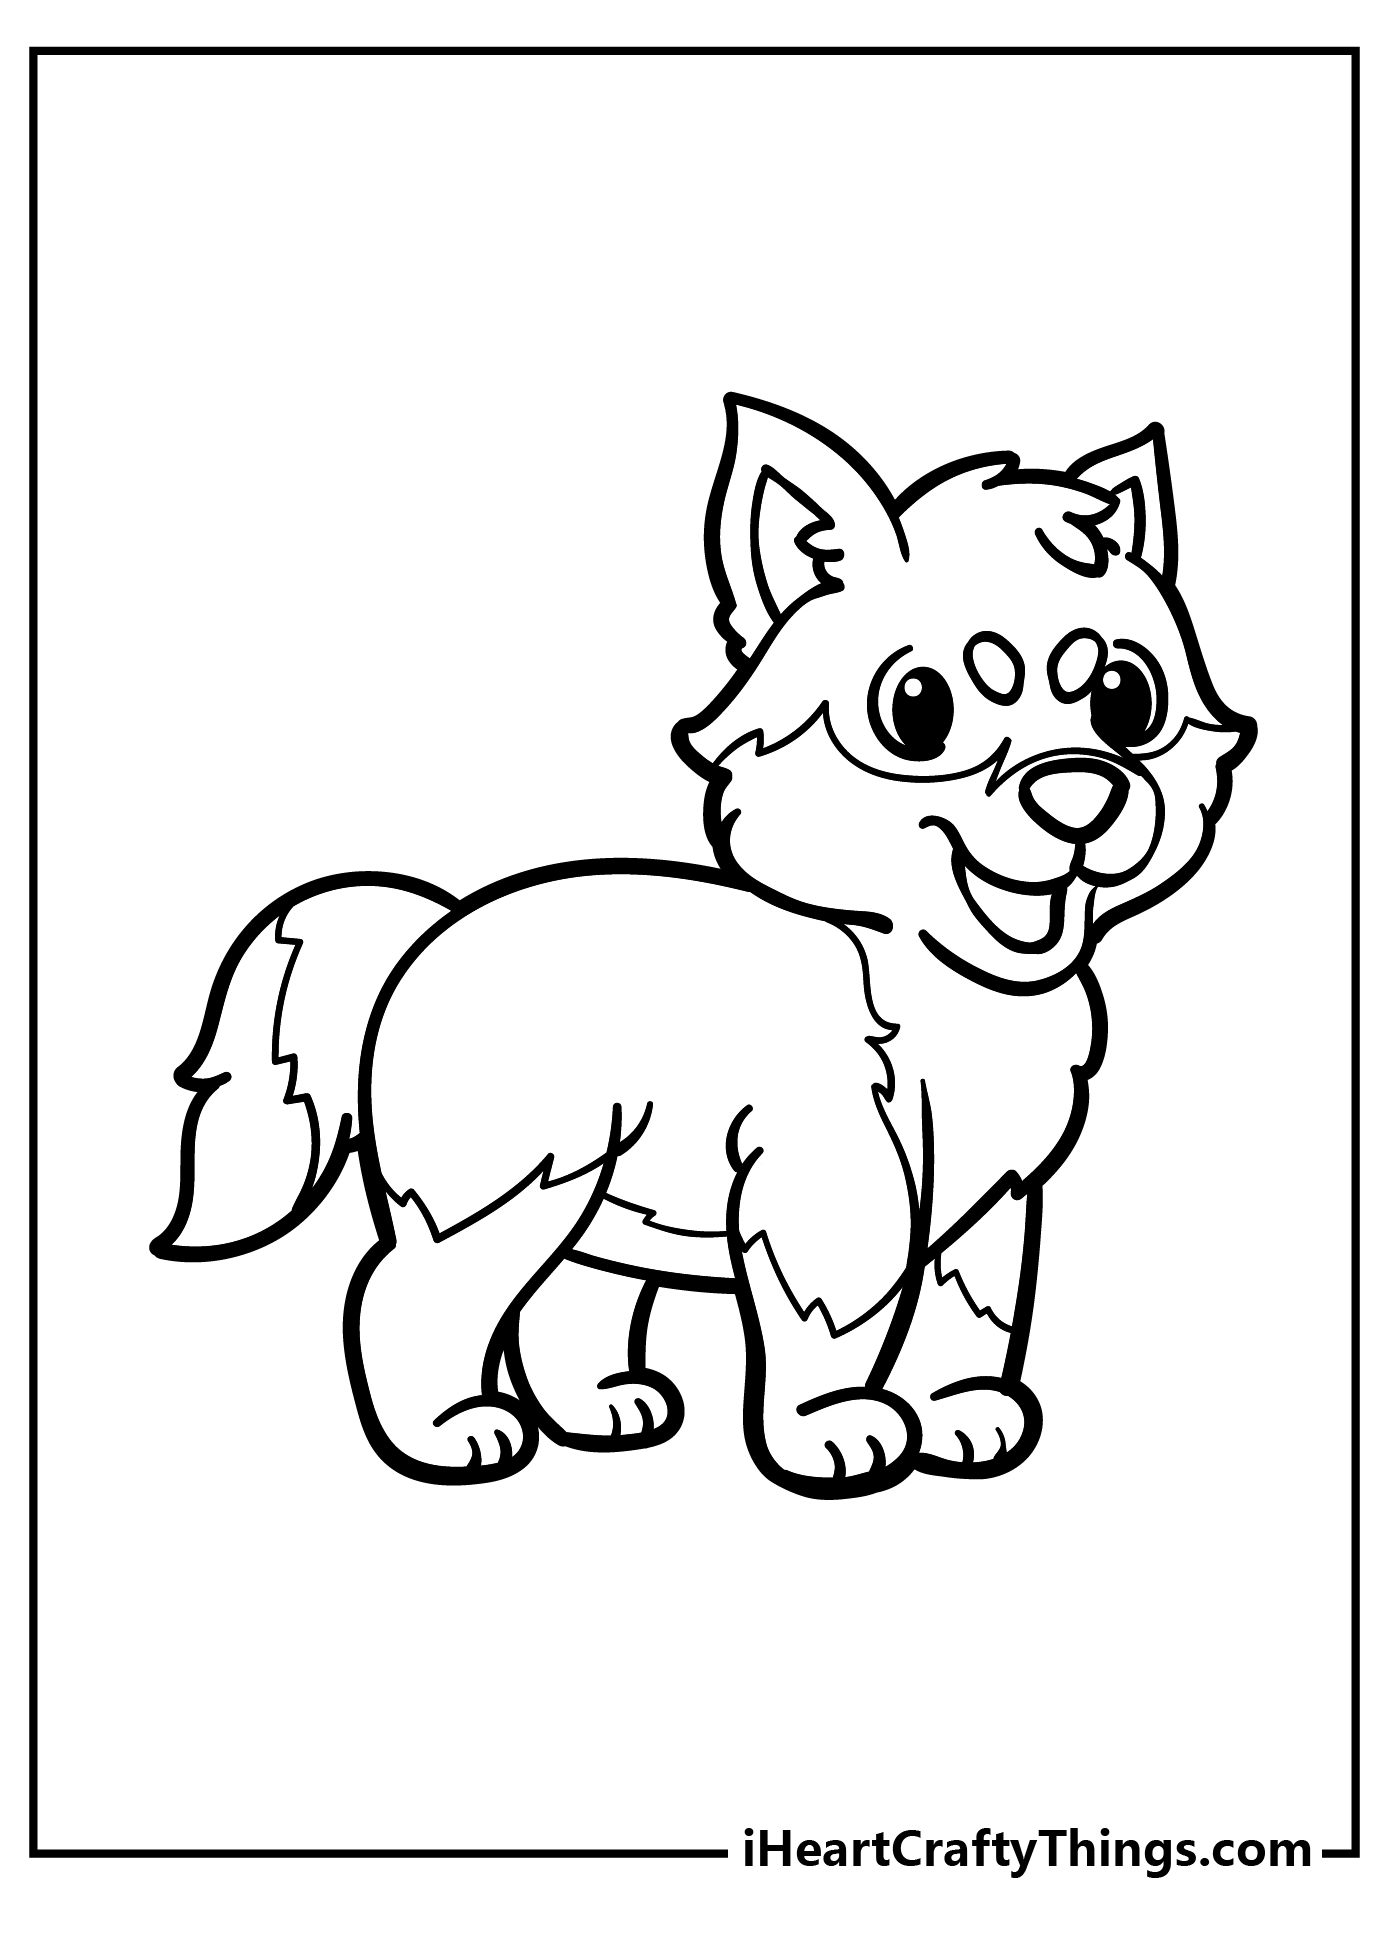 Husky Coloring Pages for adults free printable